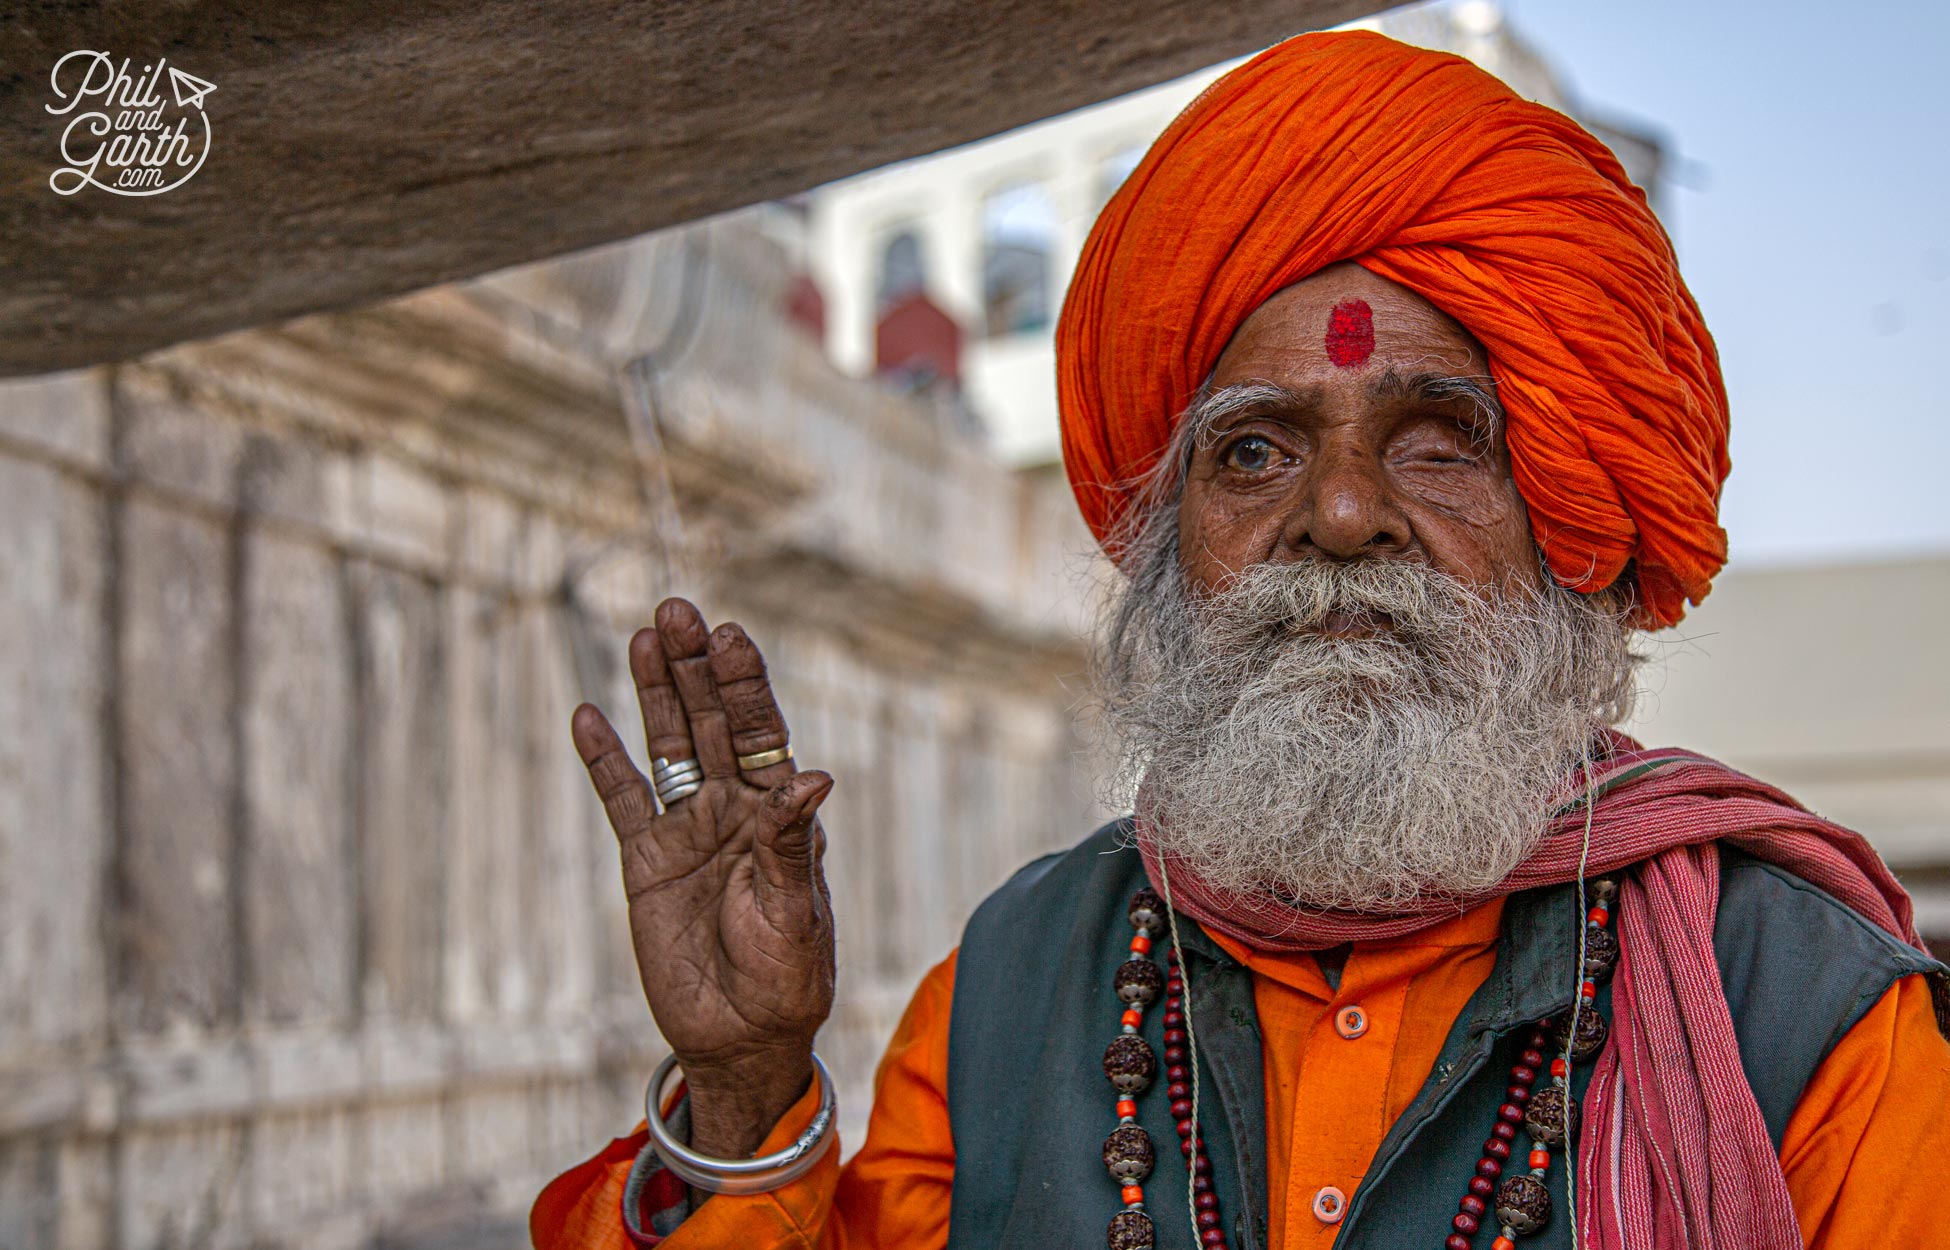 Sadhus sit outside the entrance to the Jagdish Temple. If you want to take pictures ask them first and offer some rupees 